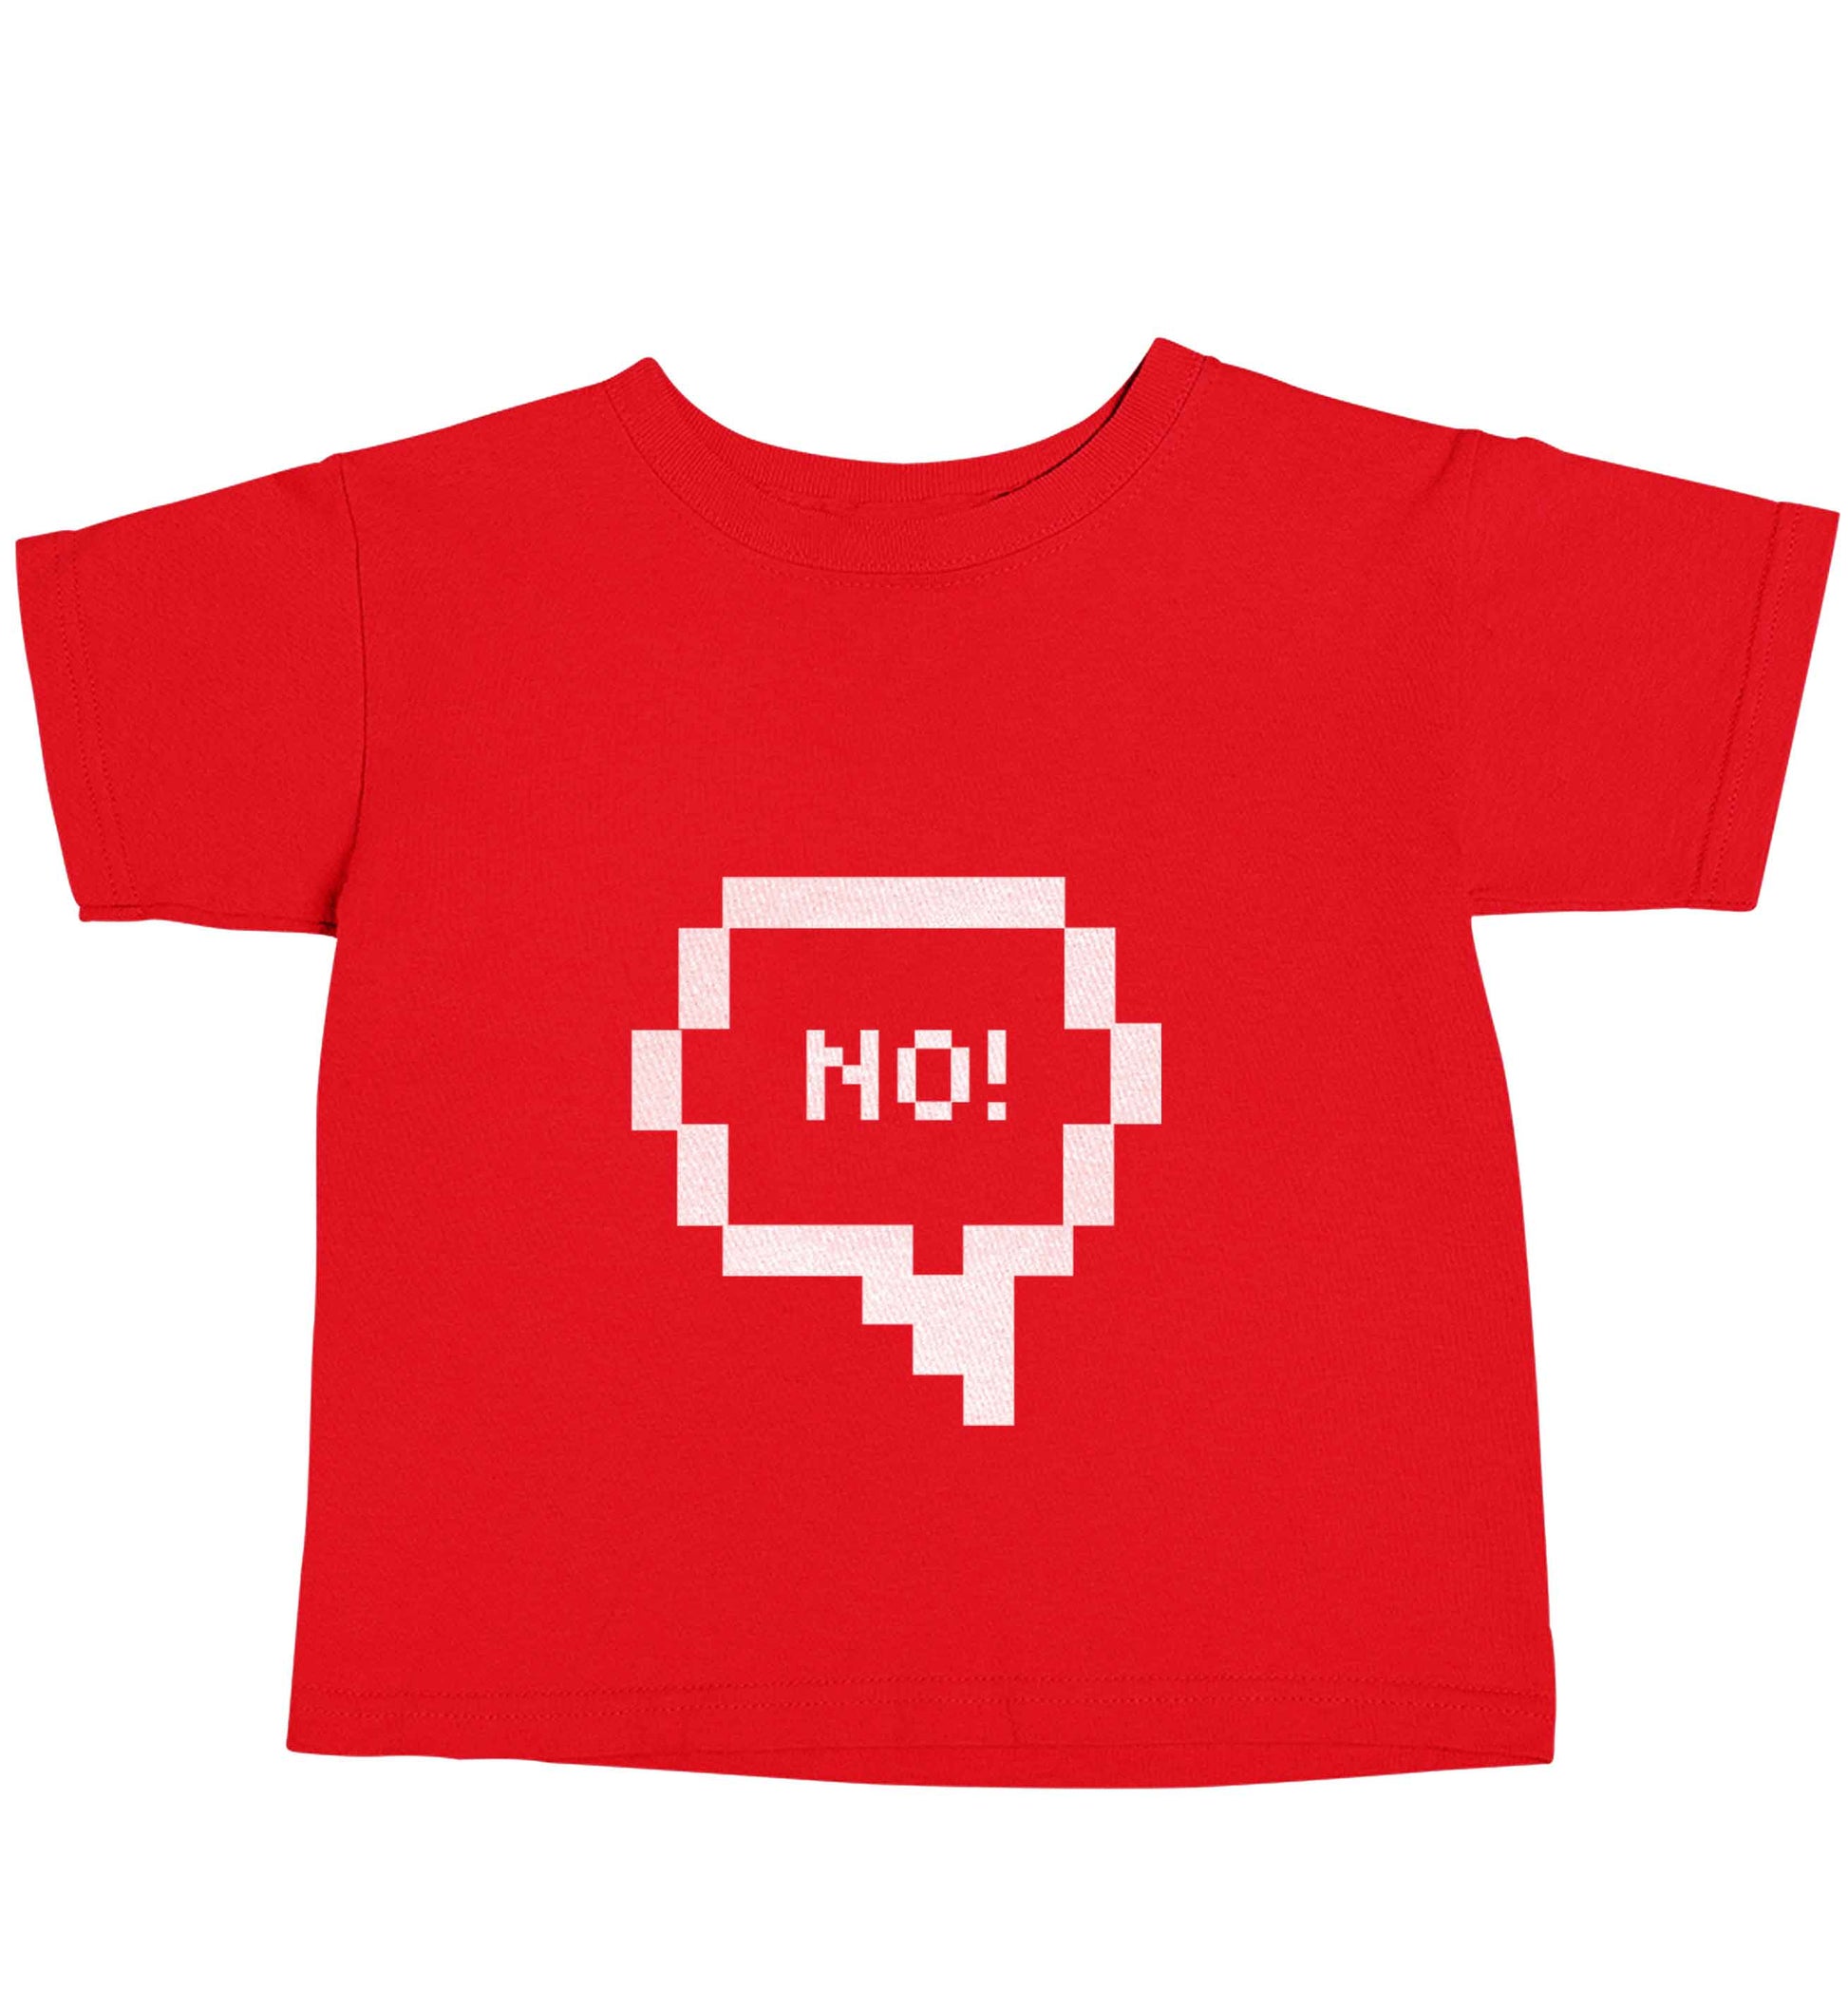 No red baby toddler Tshirt 2 Years